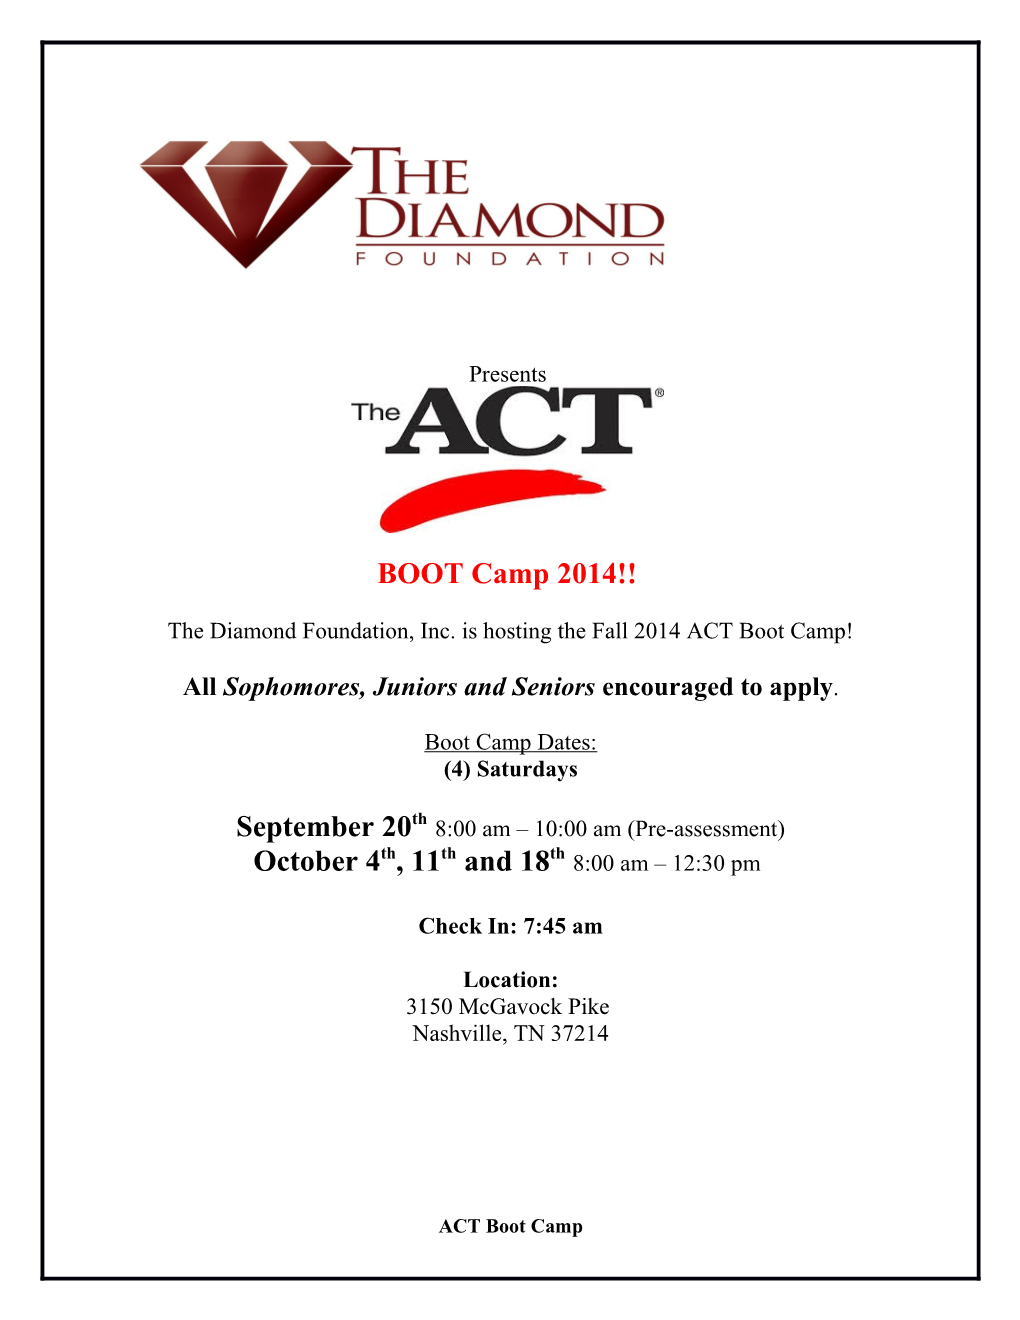 The Diamond Foundation, Inc. Is Hosting the Fall 2014 ACT Boot Camp!